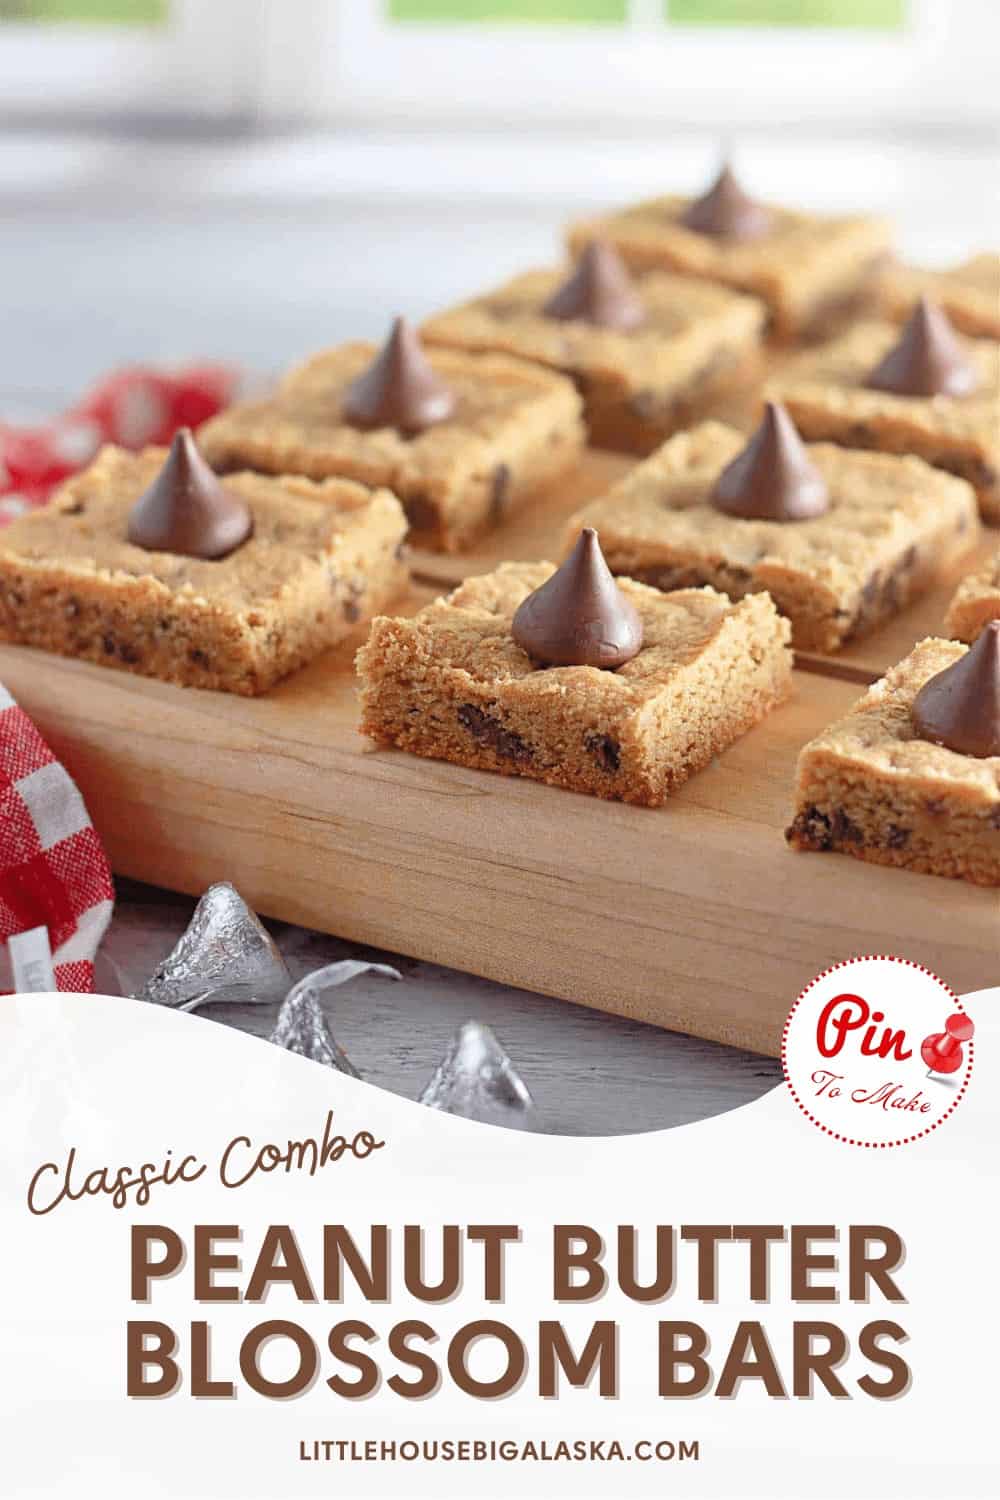 A tray of peanut butter blossom bars with a chocolate piece on top, advertised as a classic combo.